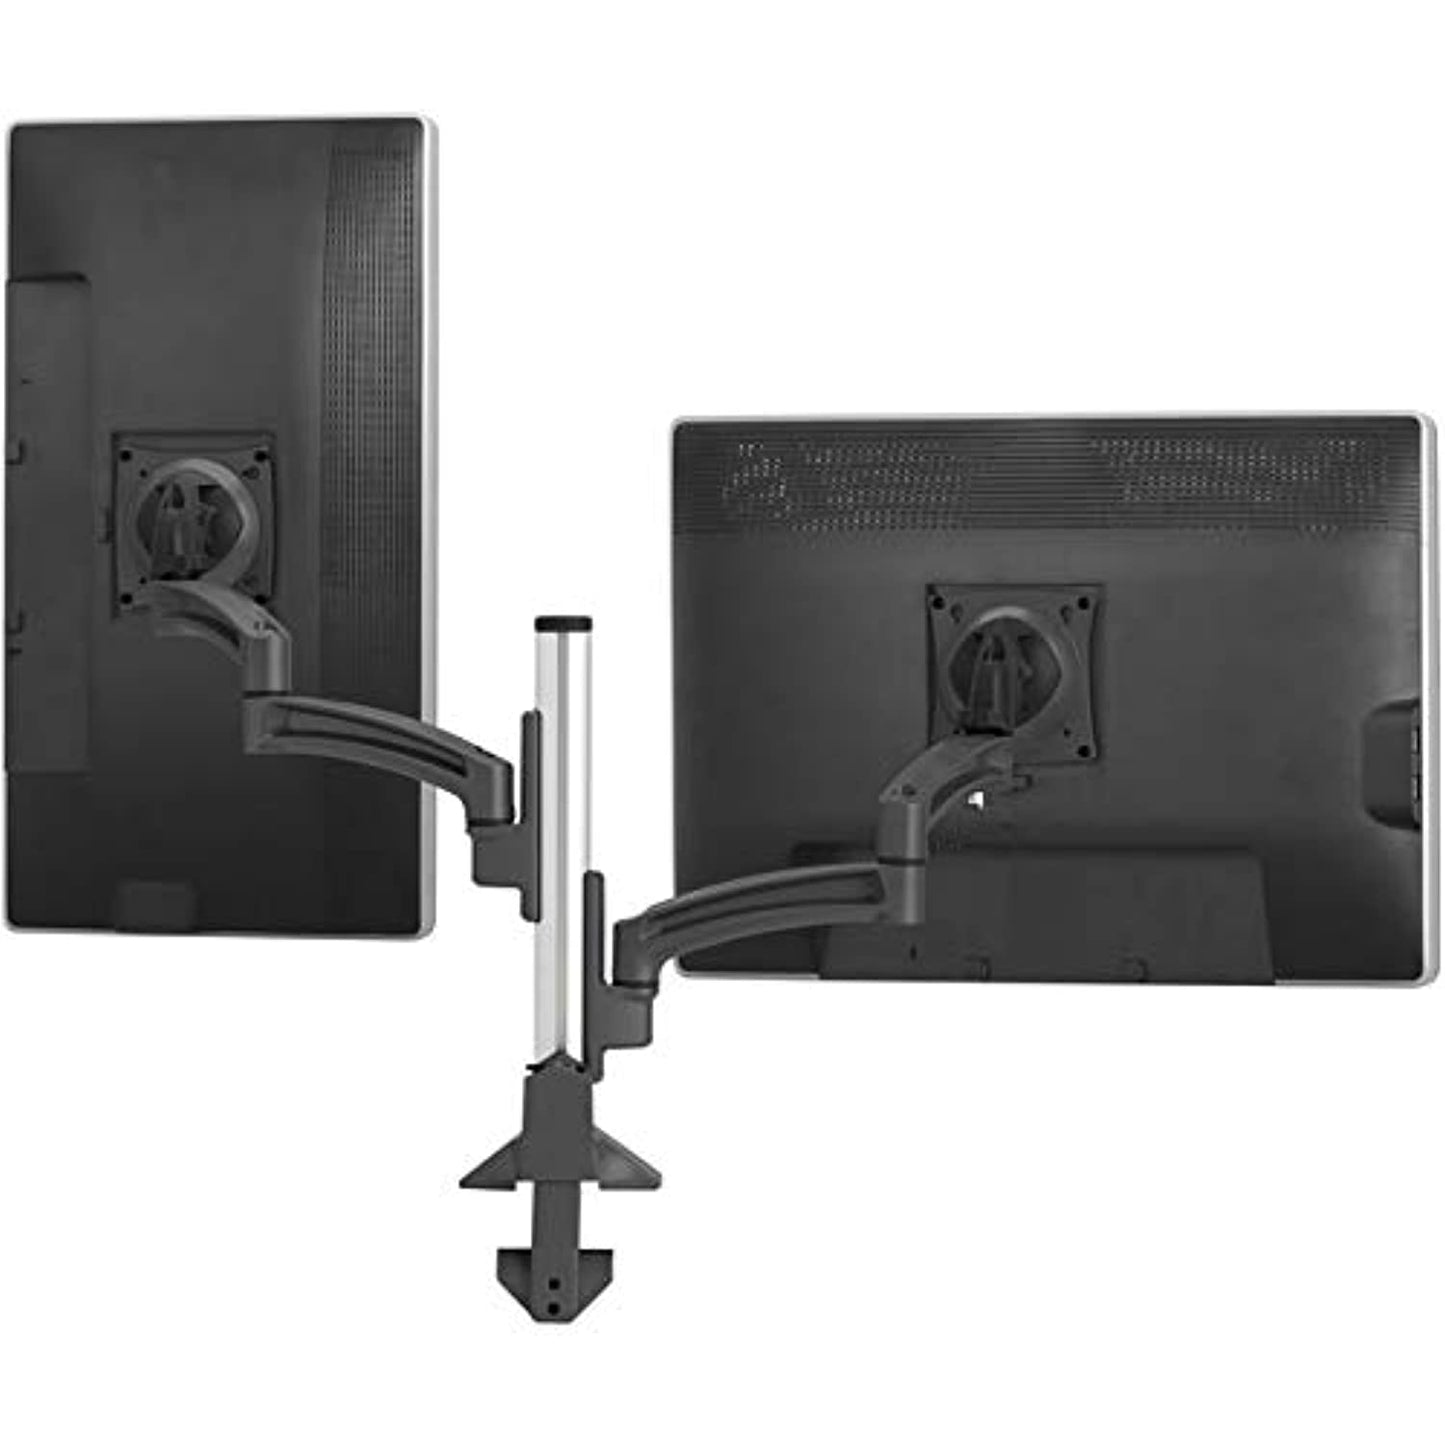 Chief Mfg. - Dual Monitor Cloumn Mount Blk "Product Category: Mounts & Brackets/Specialty Flat Panel Mounts"